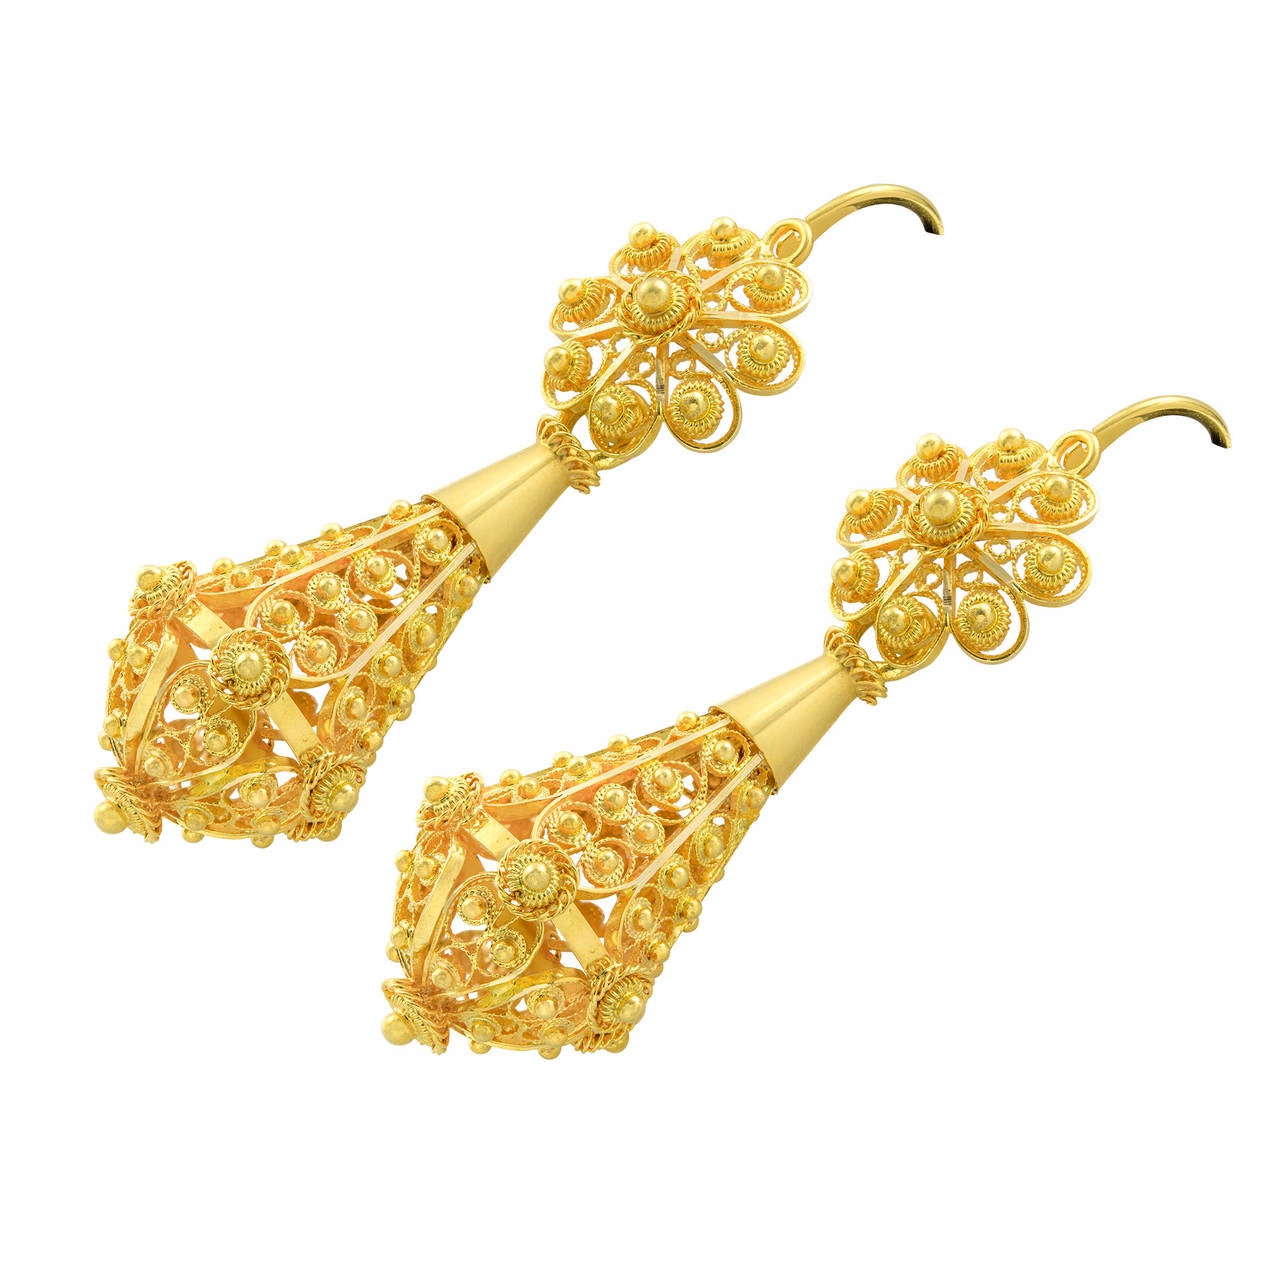 A pair of gold filigree drop earrings, the top stylised filigree flower with an ornate filigree pear shaped drop, all in 18 carat yellow gold, hallmarked London 2014, gross weight 9.30 grams